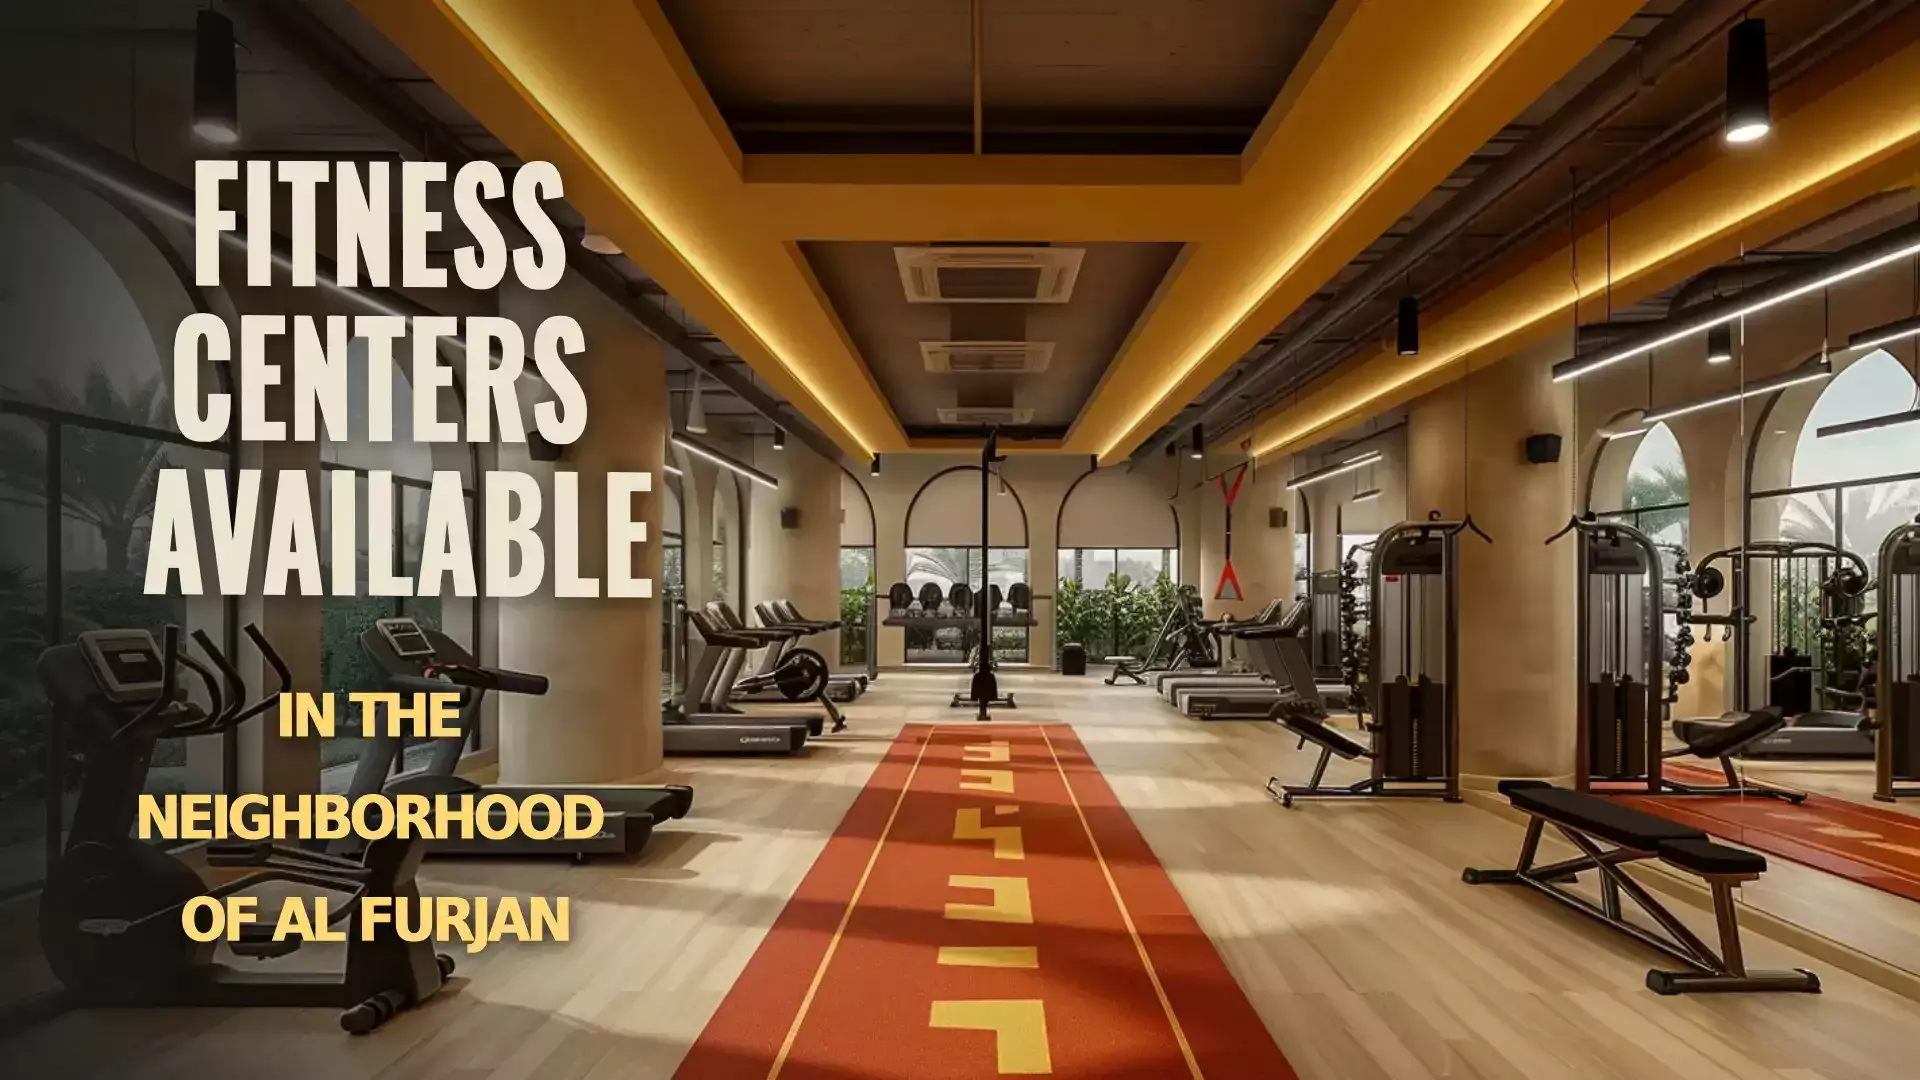 Al Furjan's Fitness Centers - Achieve Your Fitness Goals with State-of-the-Art Facilities